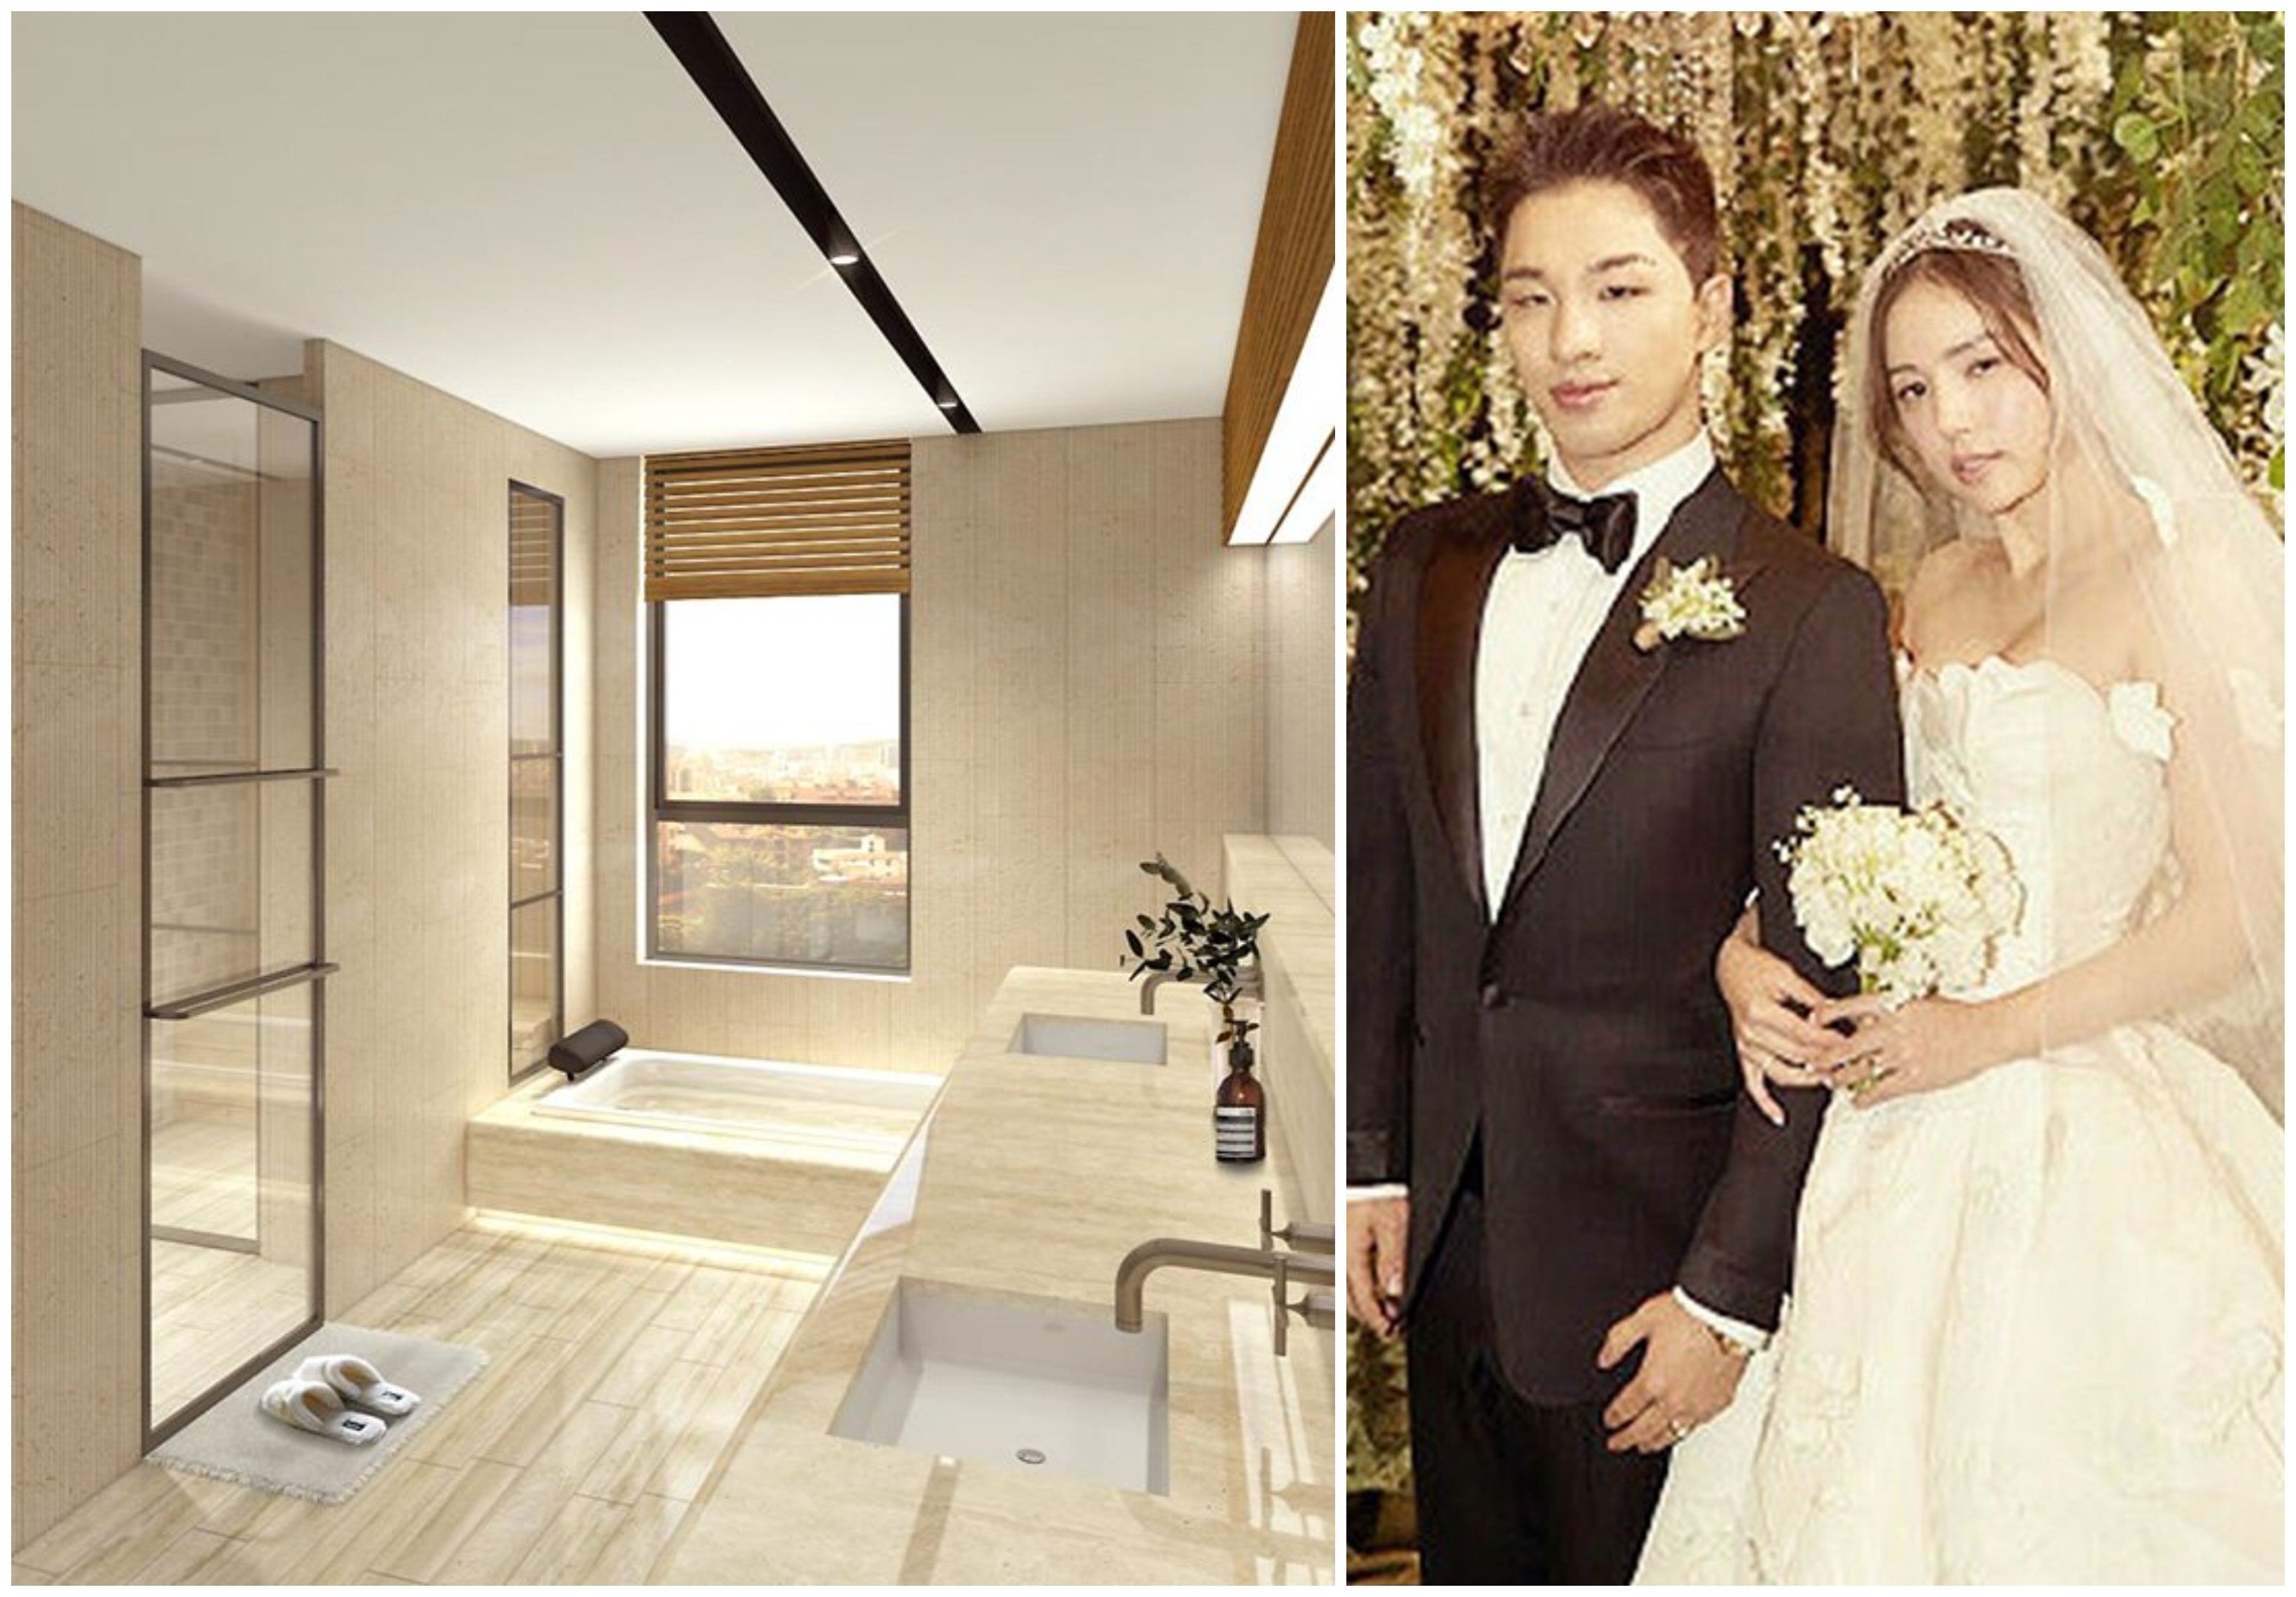 Taeyang and Min Hyo-rin, and what the bathroom of their new home could look like. Photos: Janghak Paarc Hannam/YG Entertainment